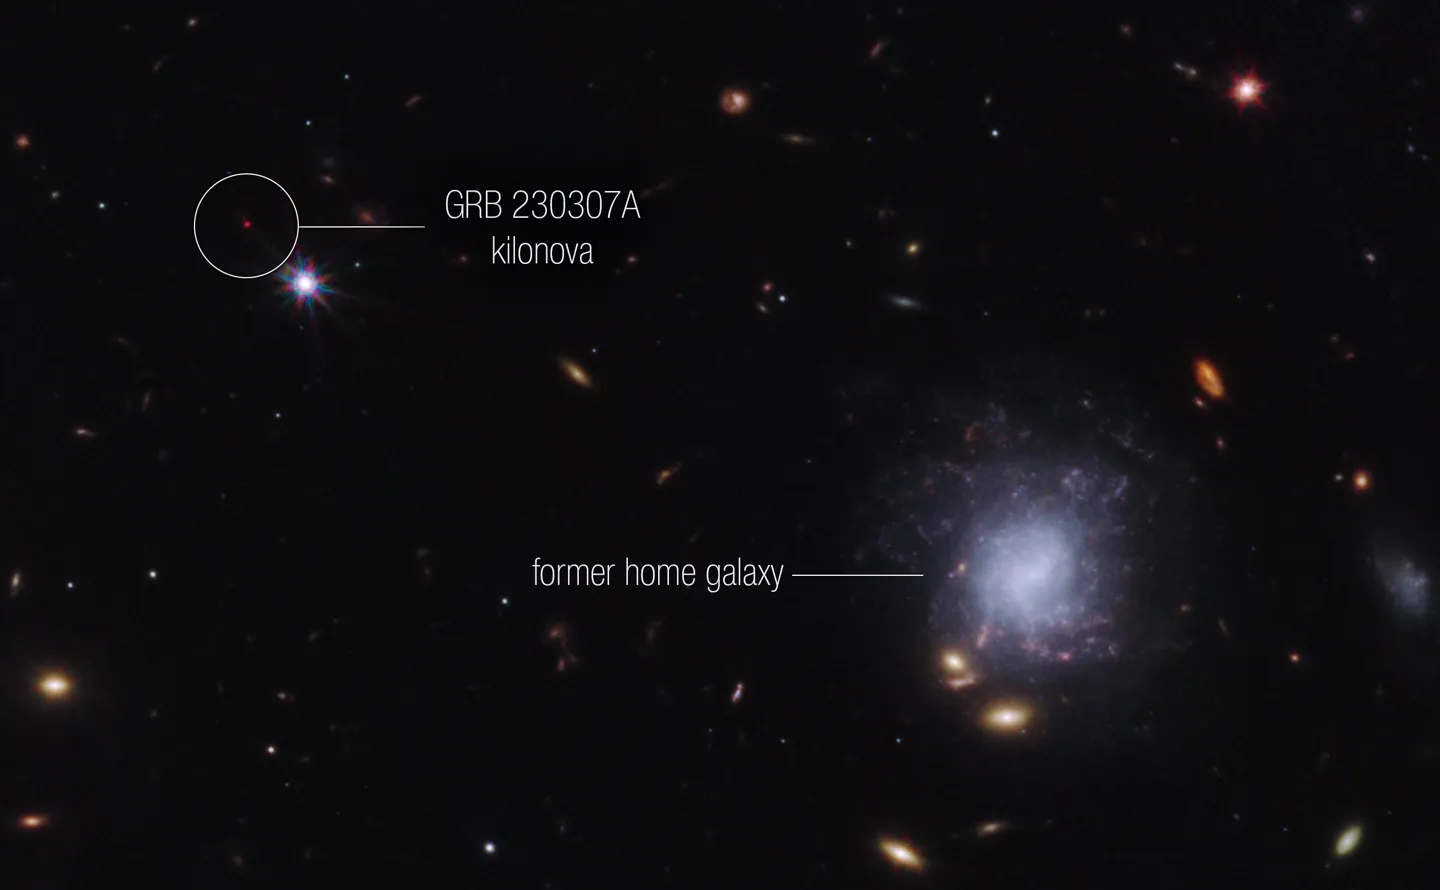 GRB 230307A’s kilonova and its former home galaxy among their local environment of other galaxies and foreground stars. 